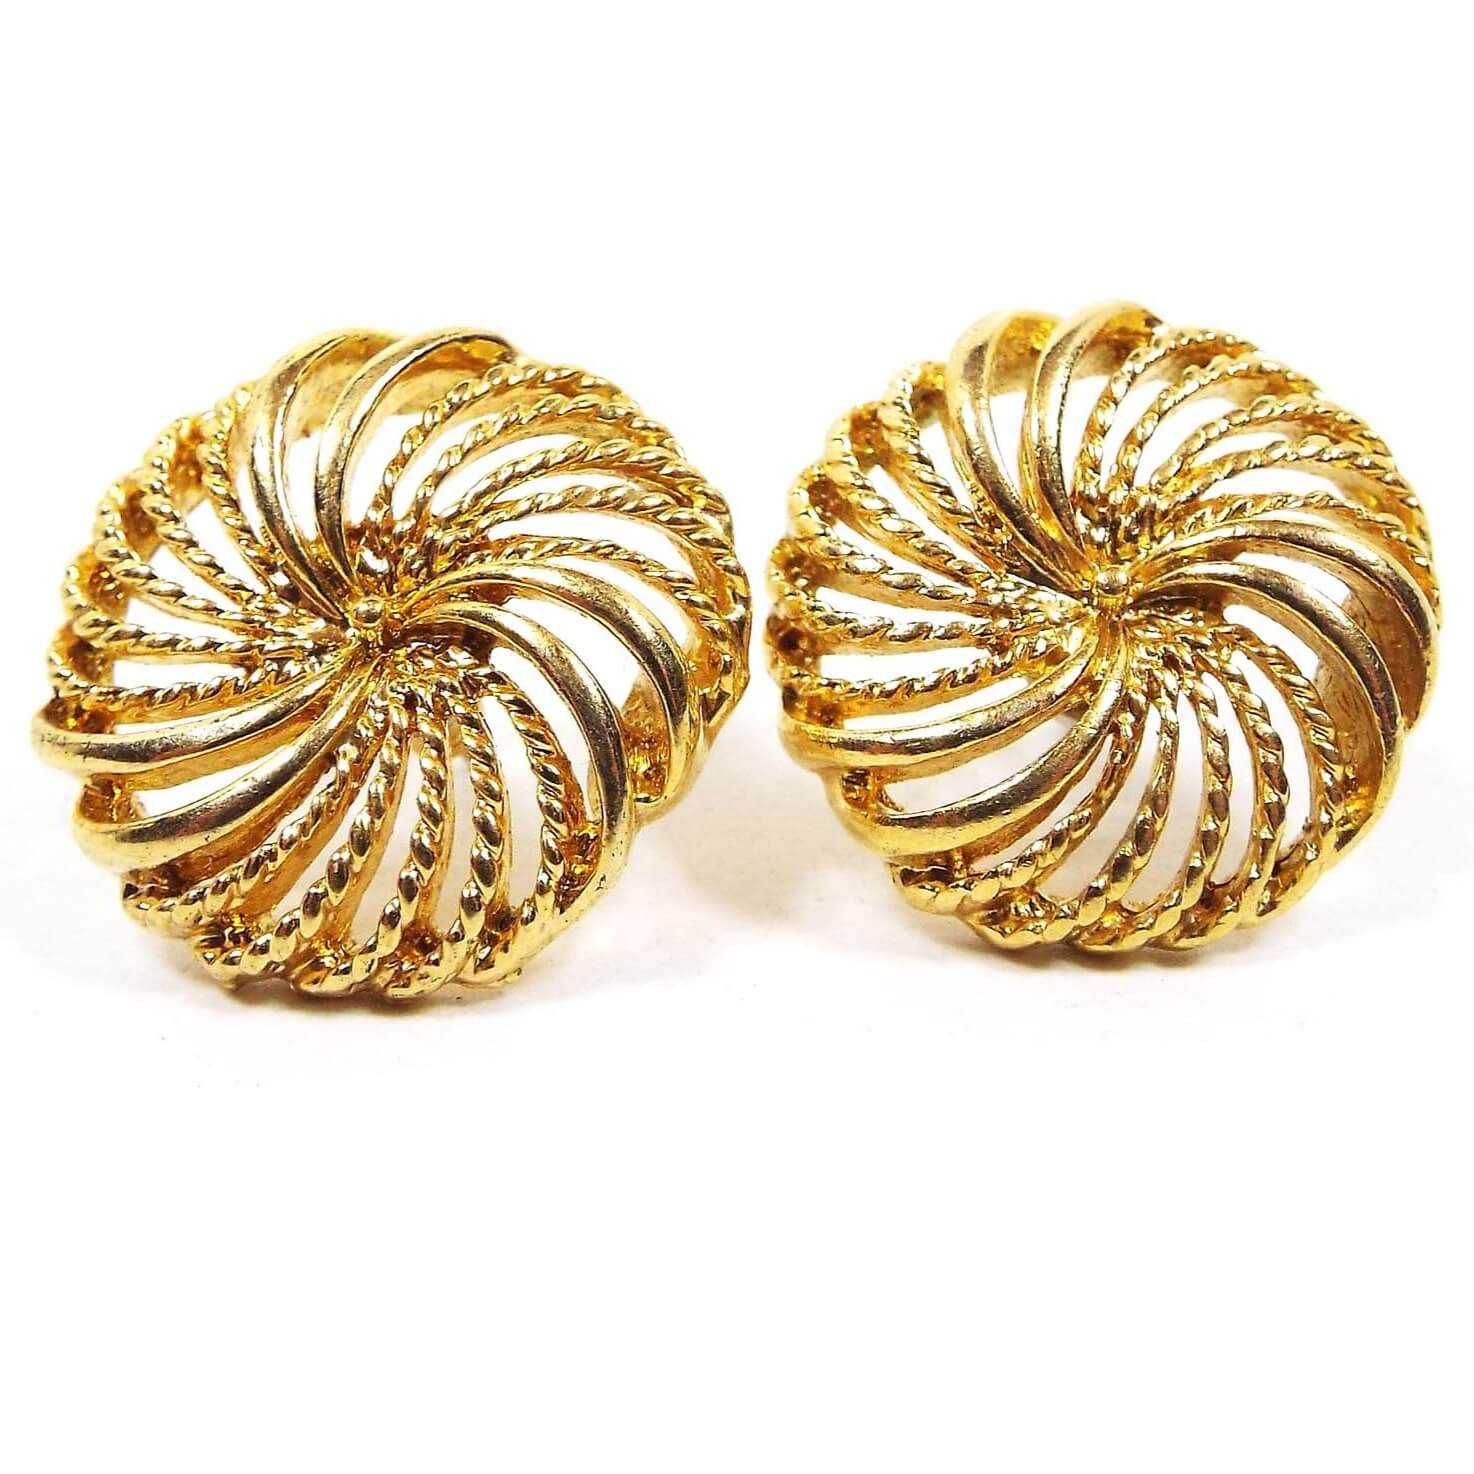 Front view of the retro vintage Napier post earrings. The are rounded filigree pinwheel shape with gold tone color metal.